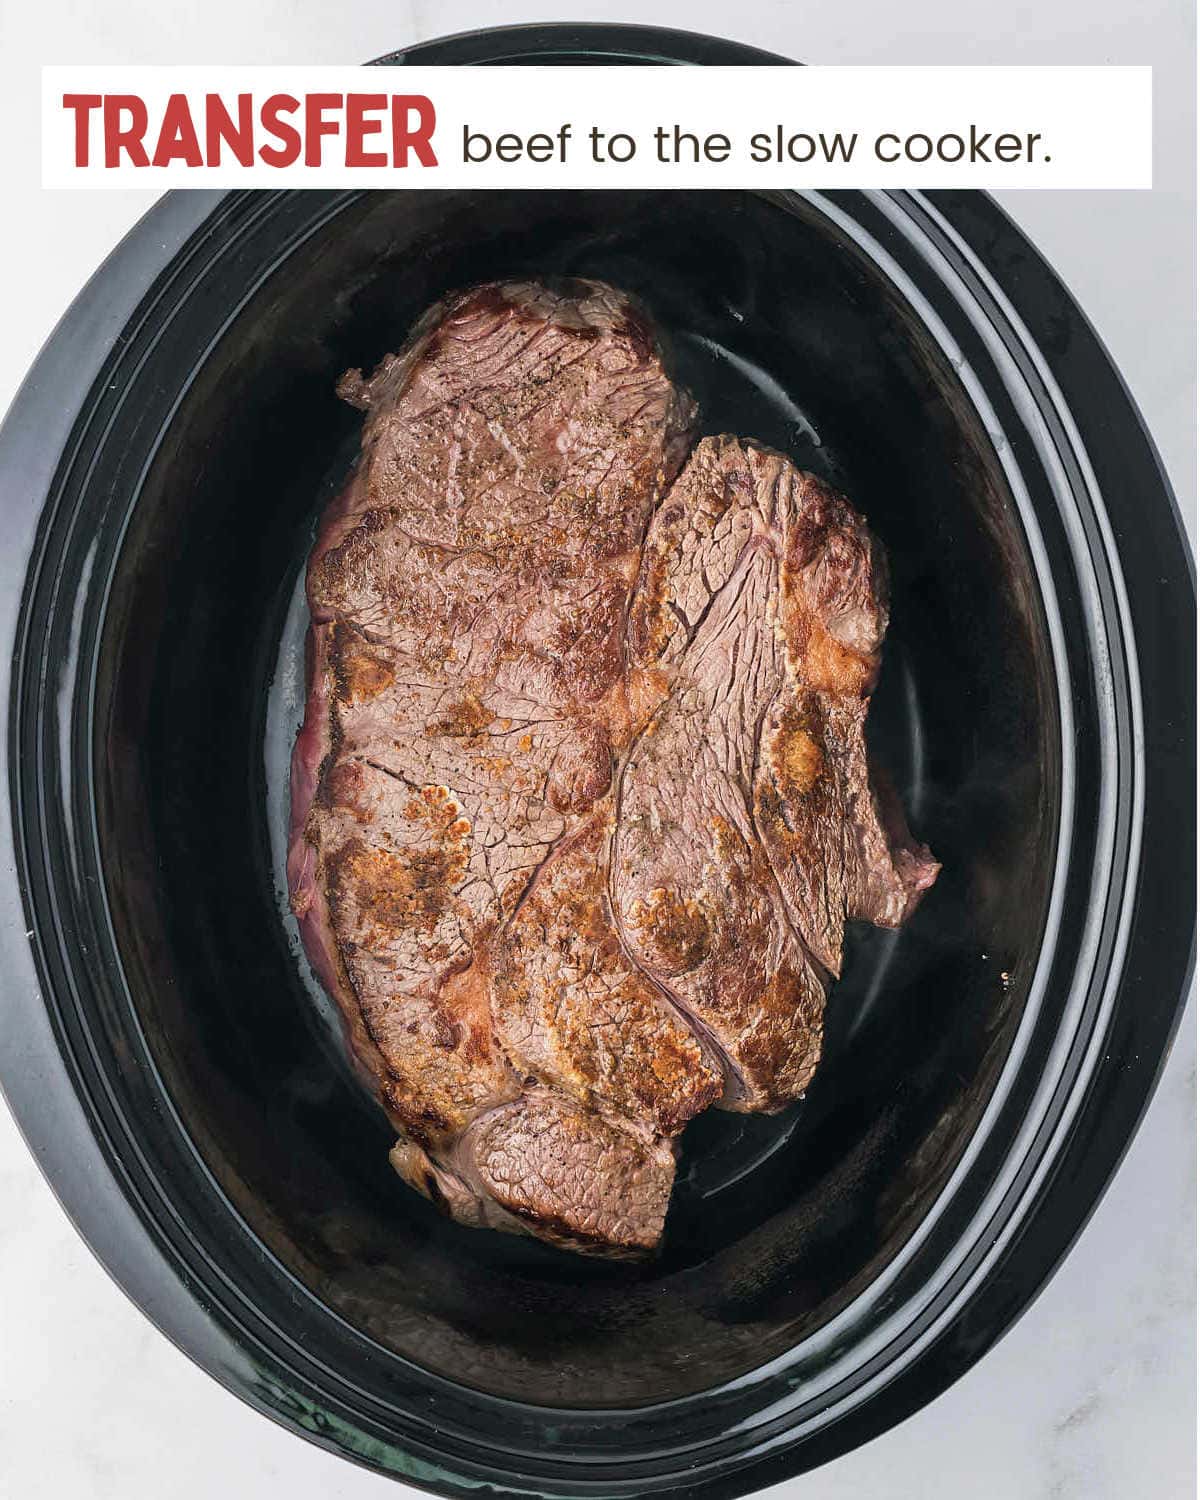 Transfer beef to the slow cooker for Crock-Pot Beef and Noodles